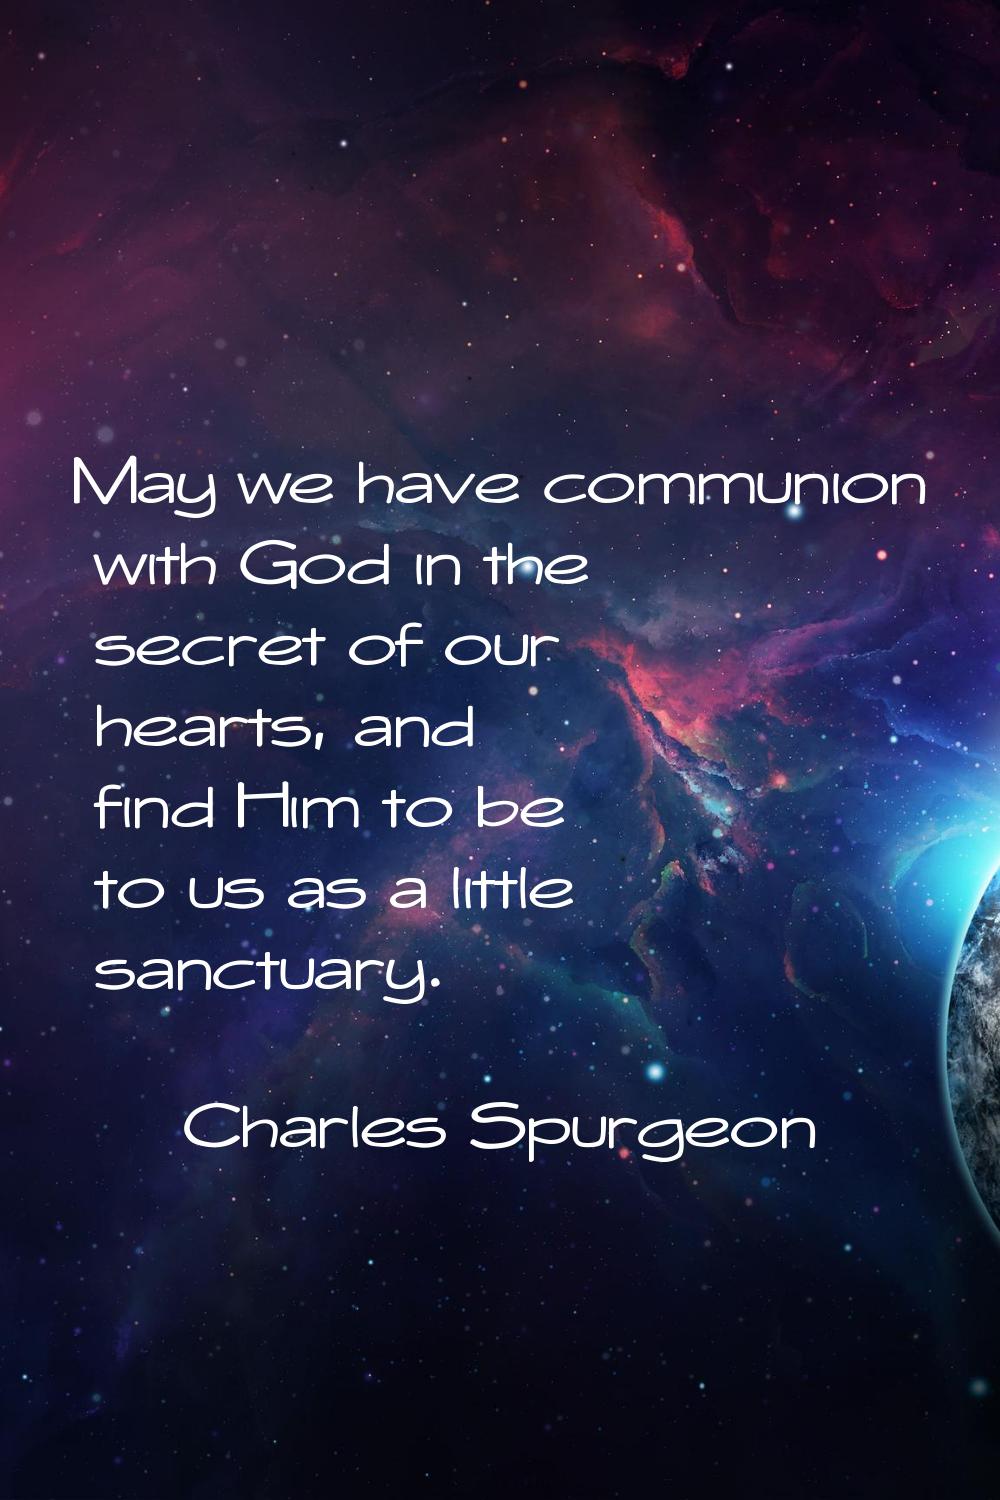 May we have communion with God in the secret of our hearts, and find Him to be to us as a little sa